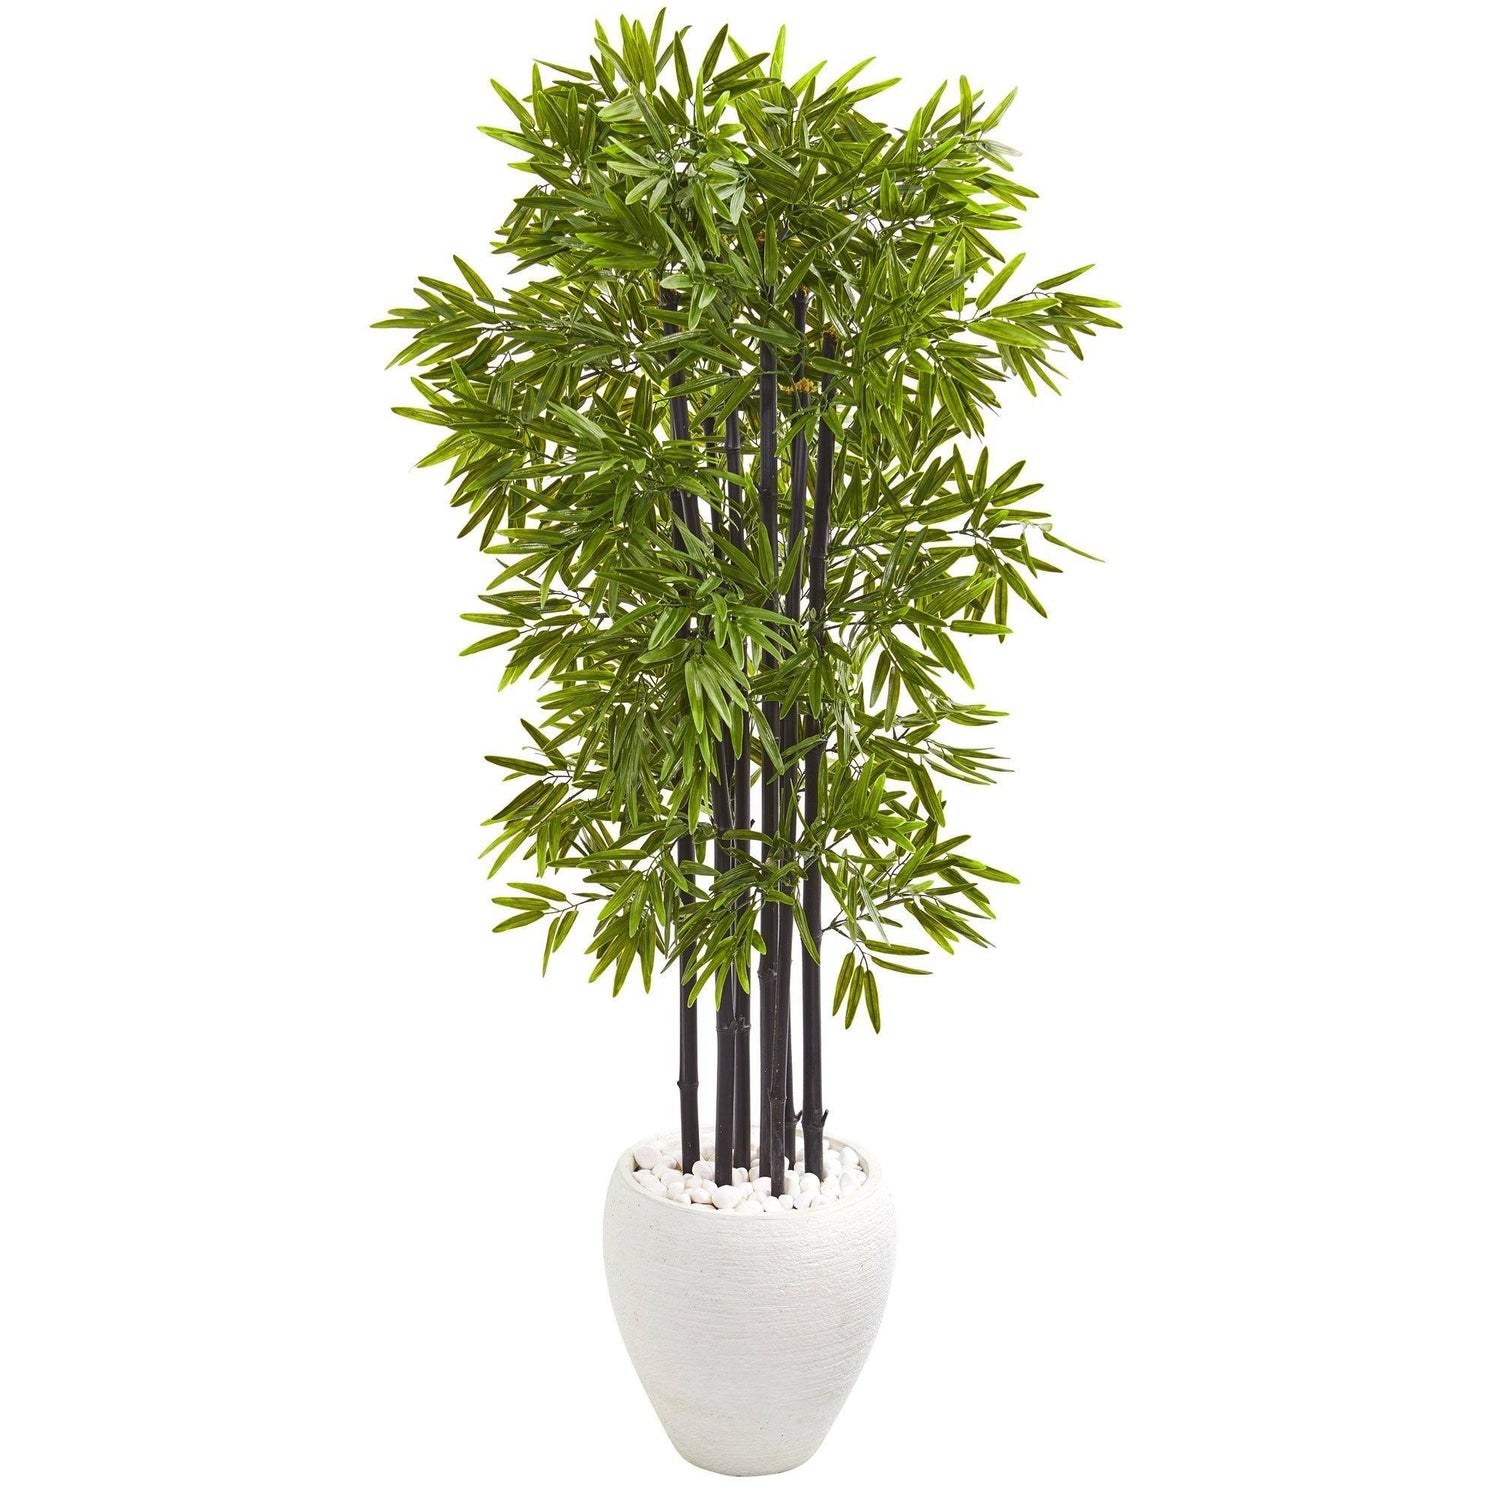 5’ Bamboo Artificial Tree with Black Trunks in White Planter (Indoor/Outdoo)